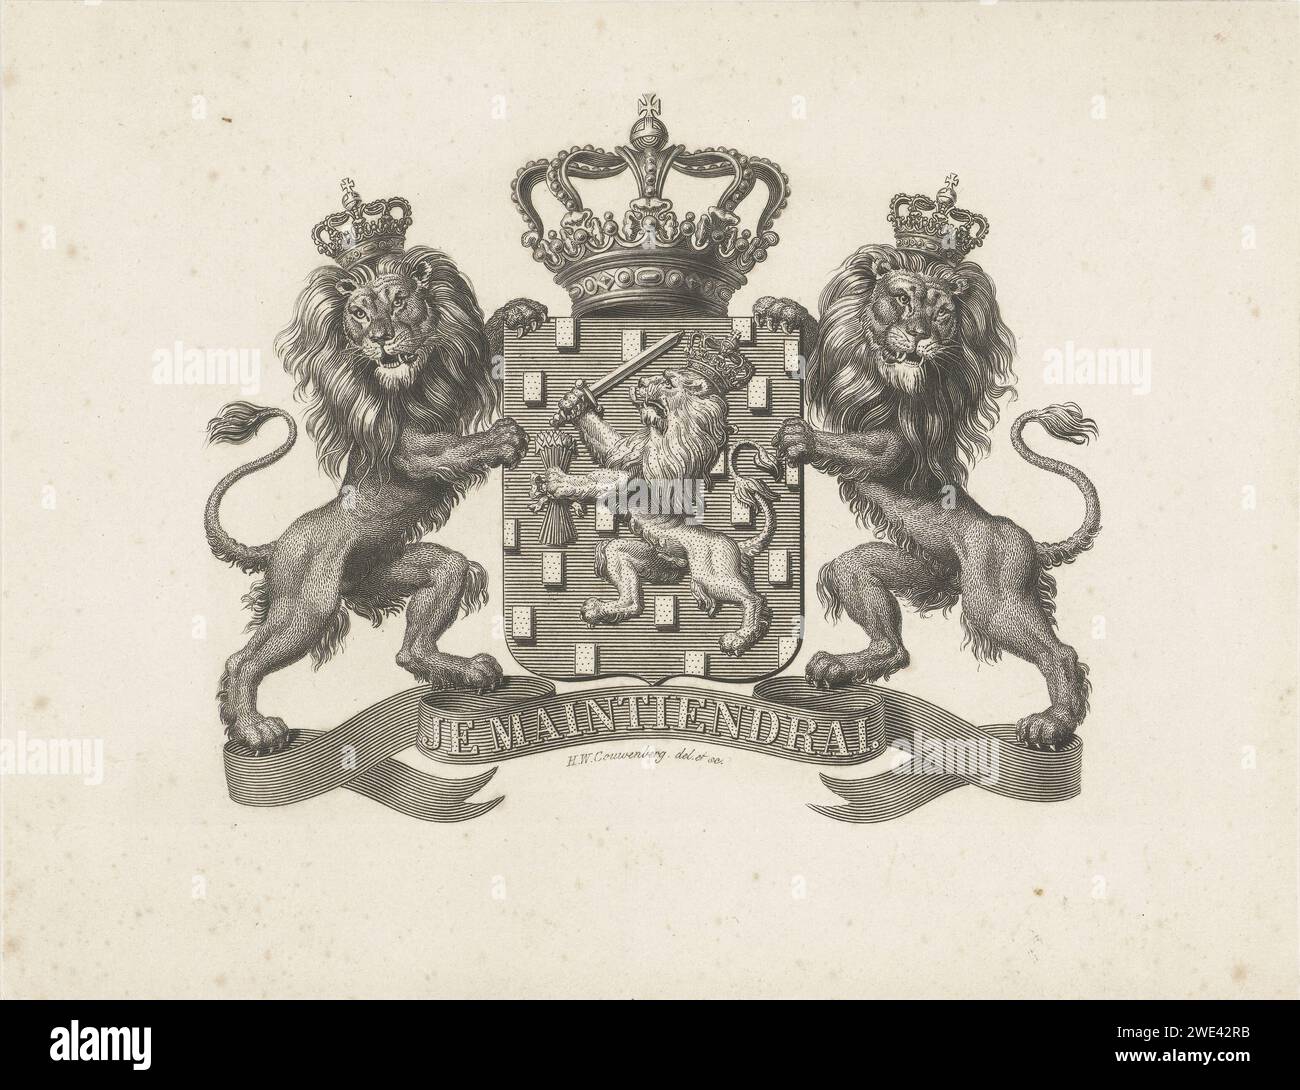 Weapon of the Netherlands with motto: Je Maintiendrai, Henricus Wilhelmus Couwenberg, 1830 - 1845 print  Amsterdam paper etching coat of arms (as symbol of the state, etc.) Stock Photo